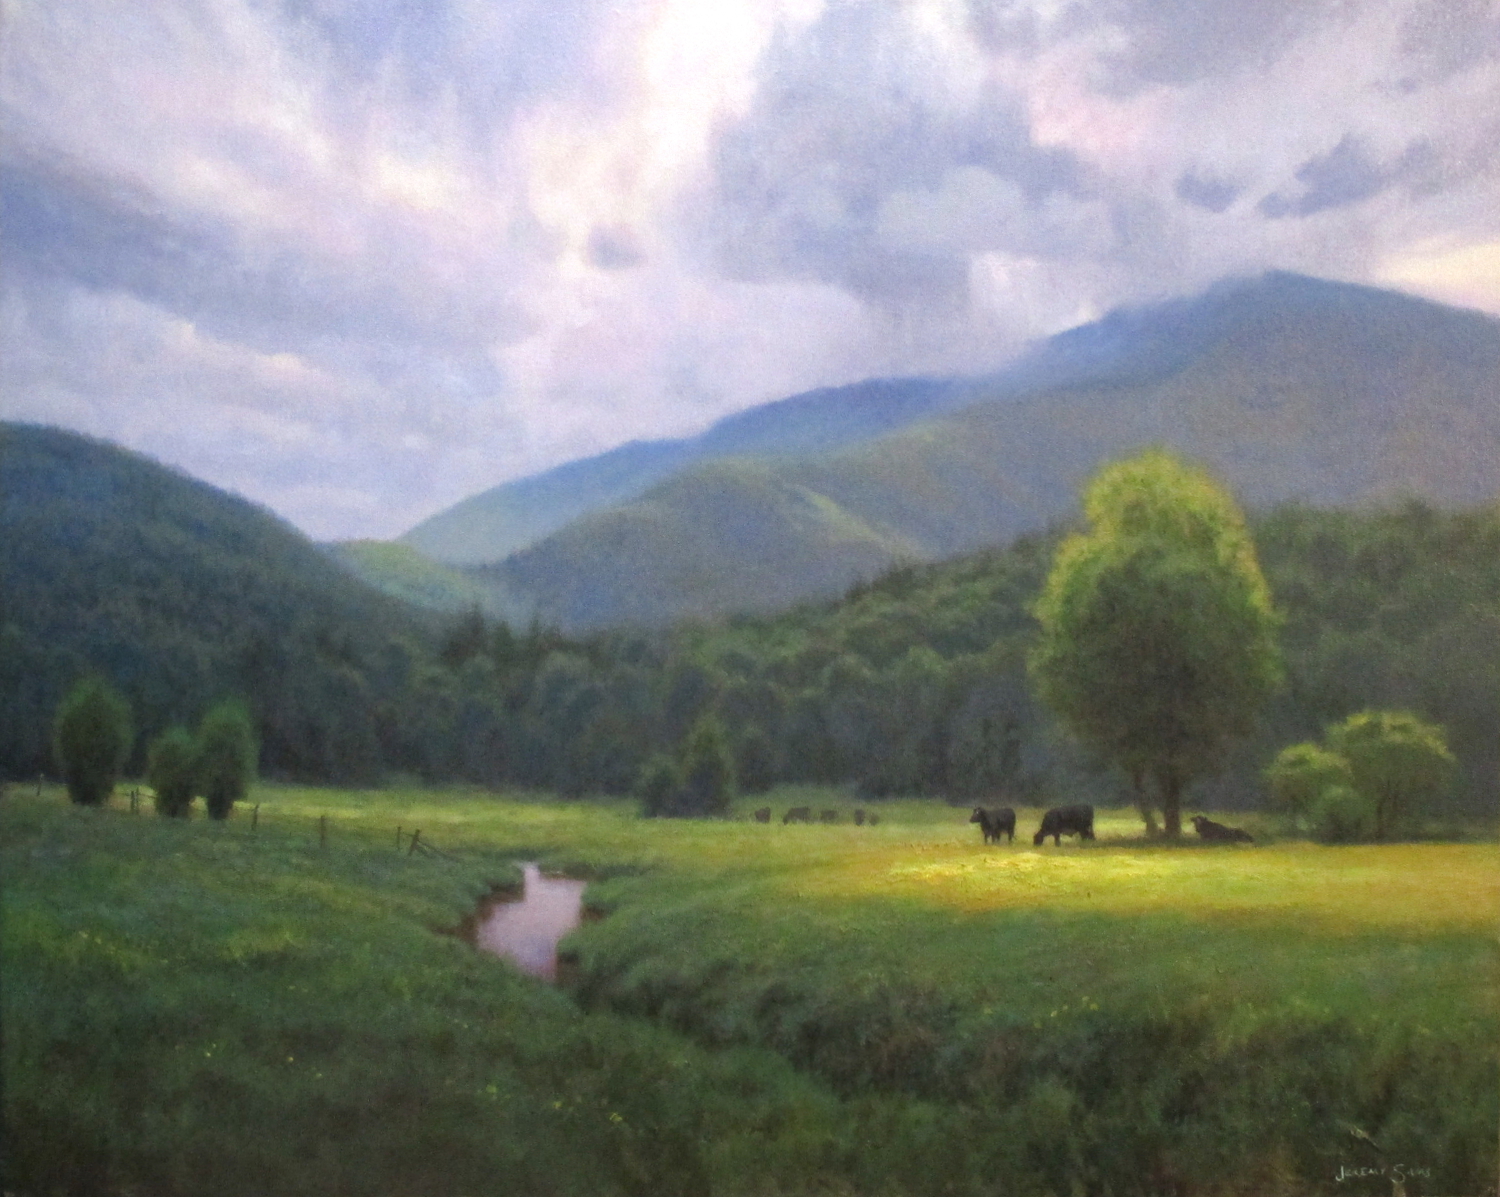 Painting of cows in the field below Celo Mountain before a rain storm by North Carolina artist Jeremy Sams